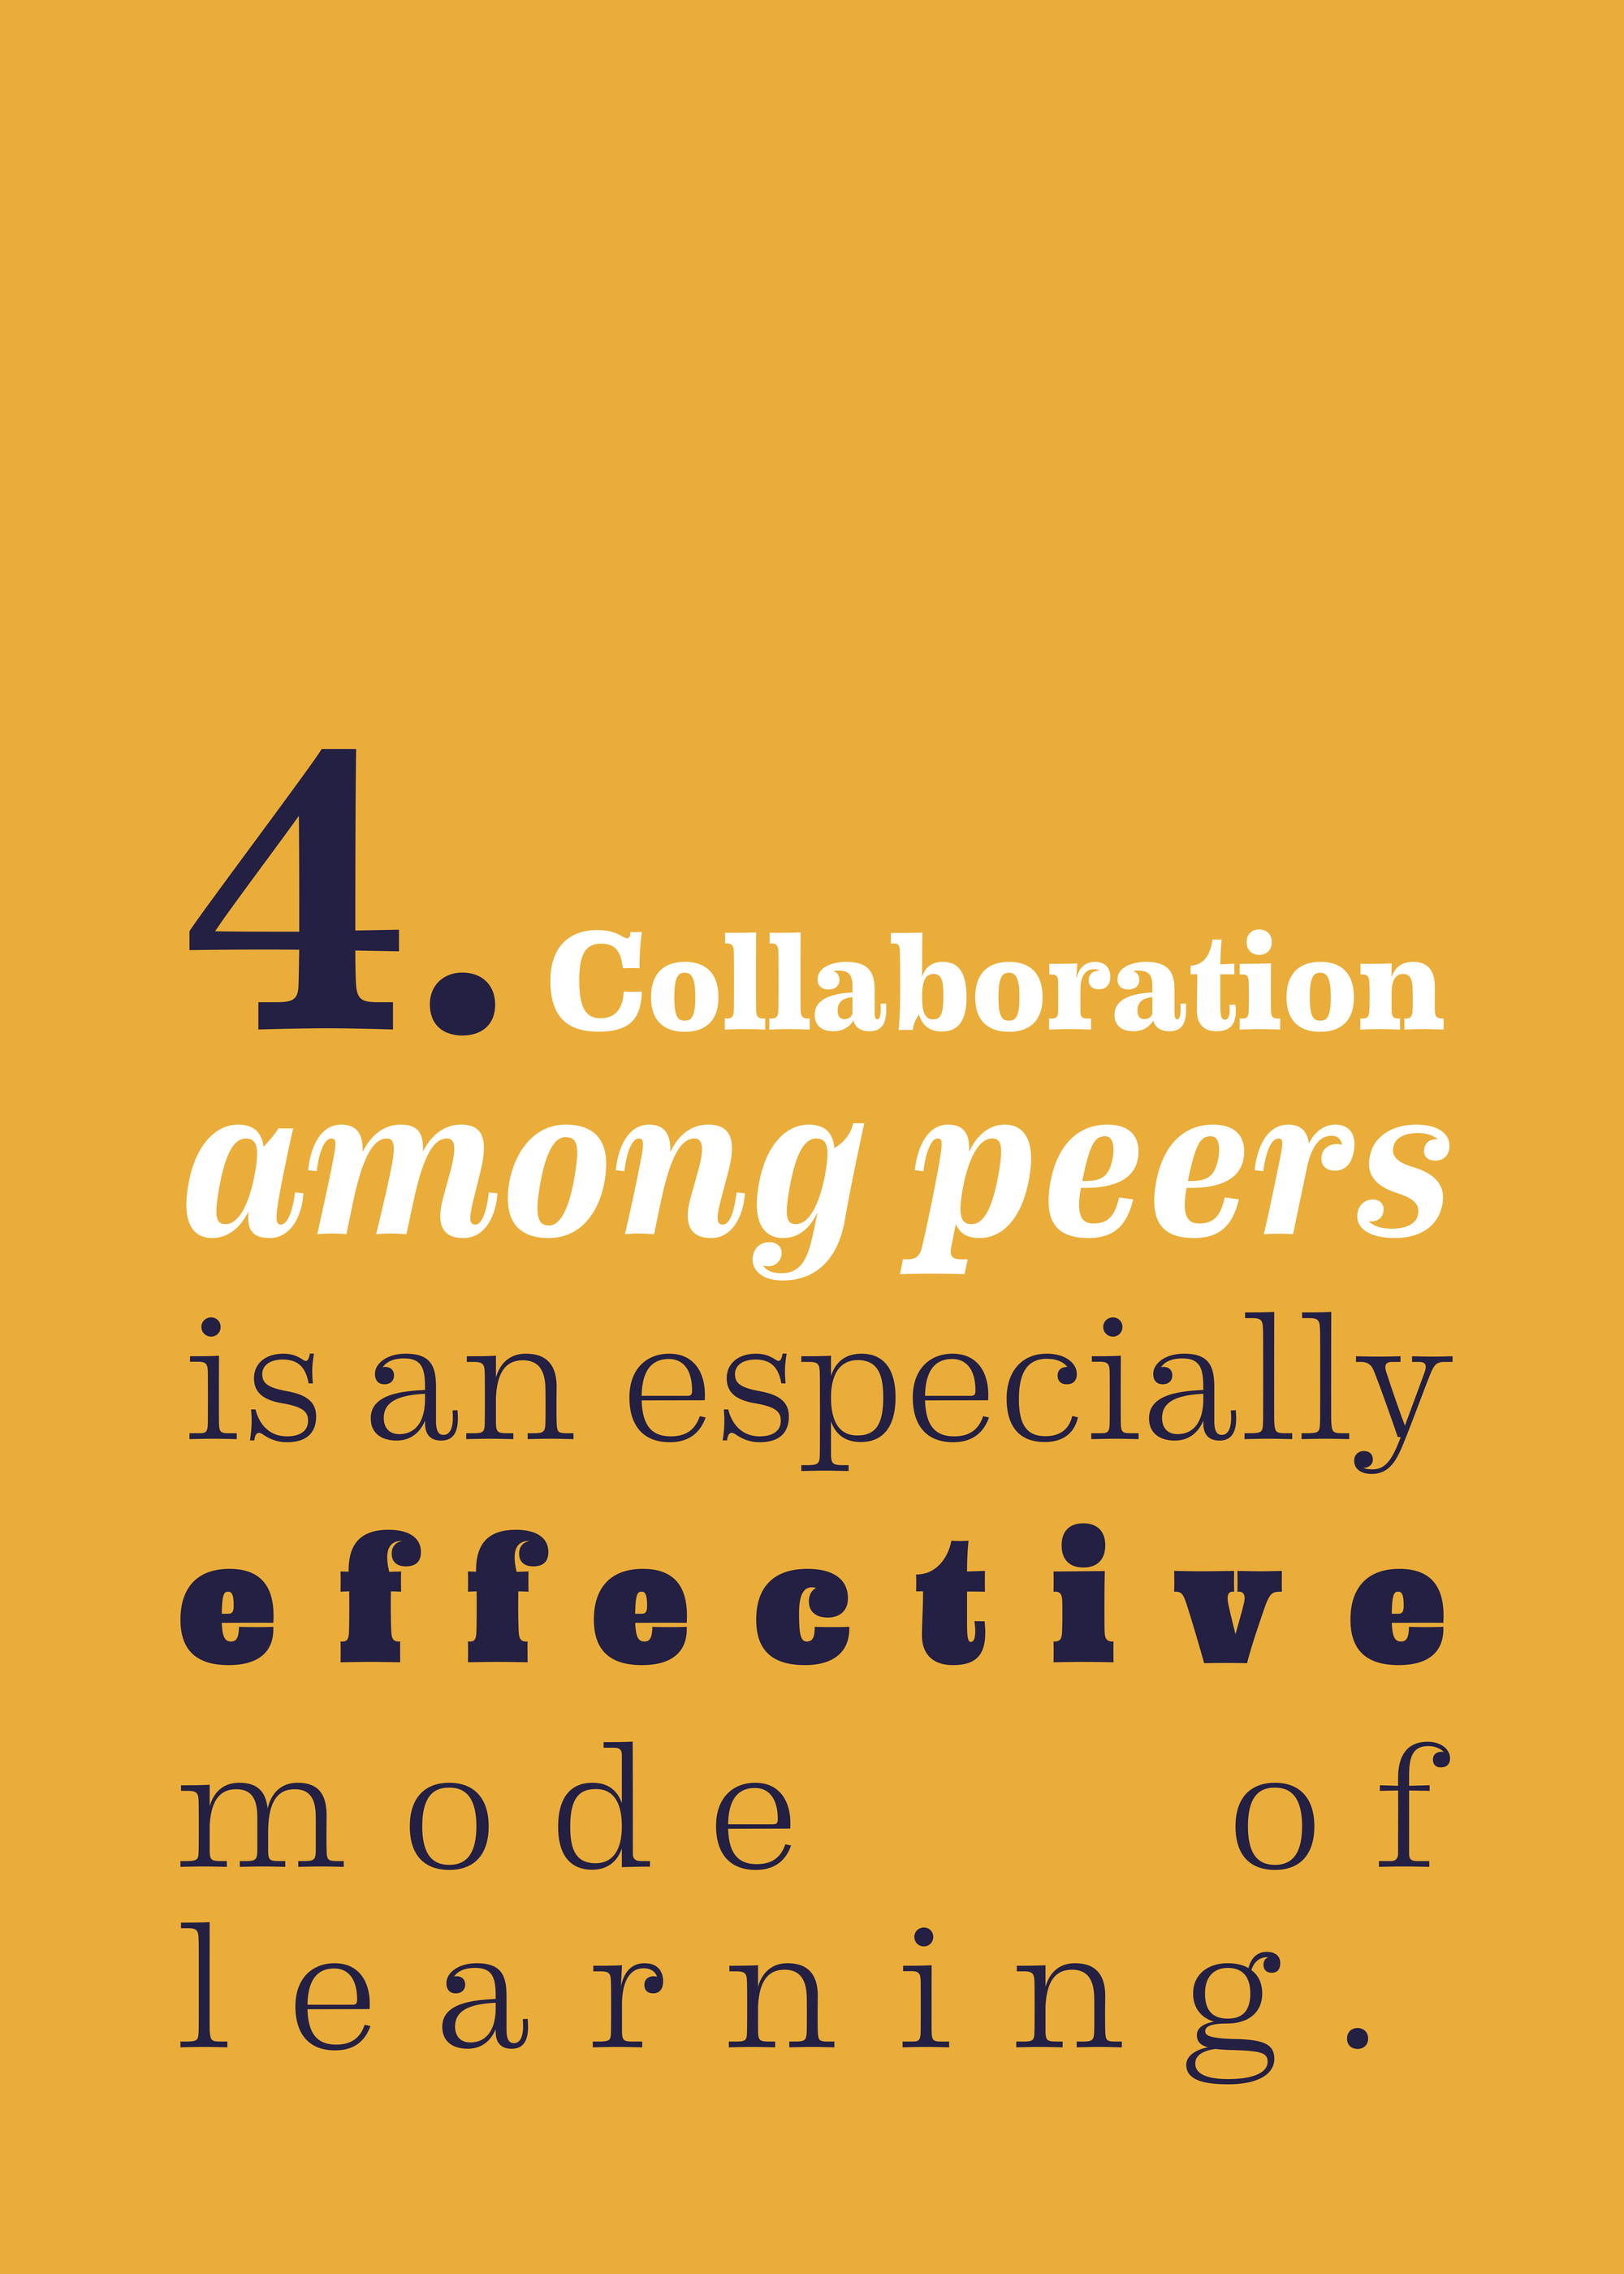 4. Collaboration among peers is an especially effective mode of learning